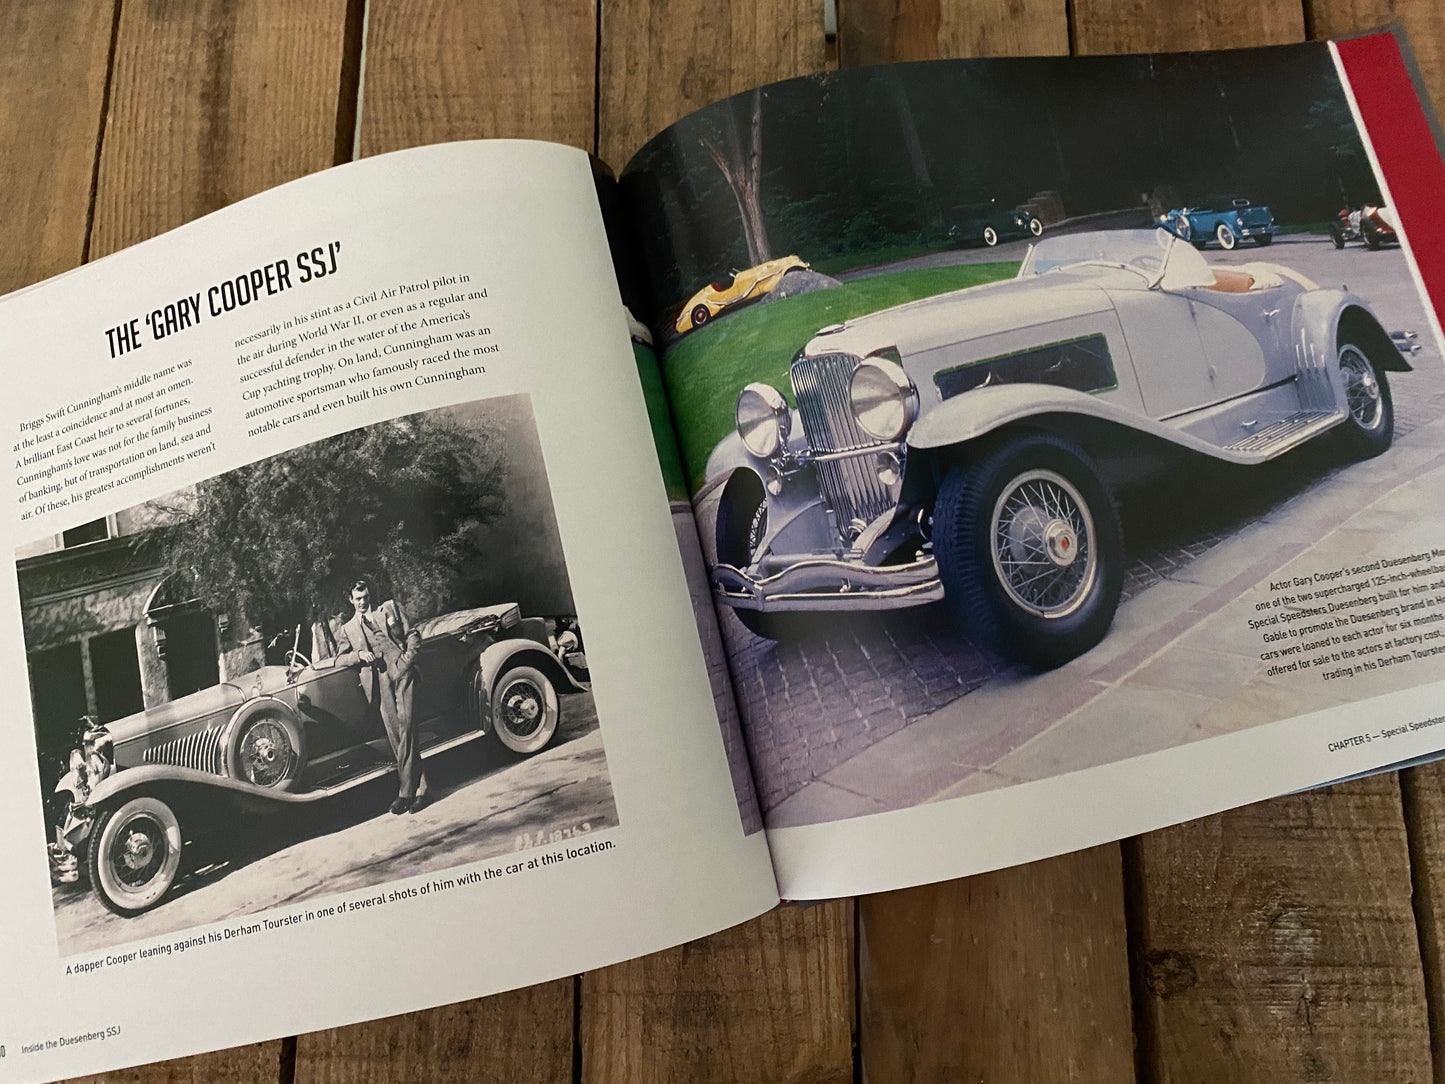 Inside the Duesenberg SSJ: The Special Speedsters limited edition